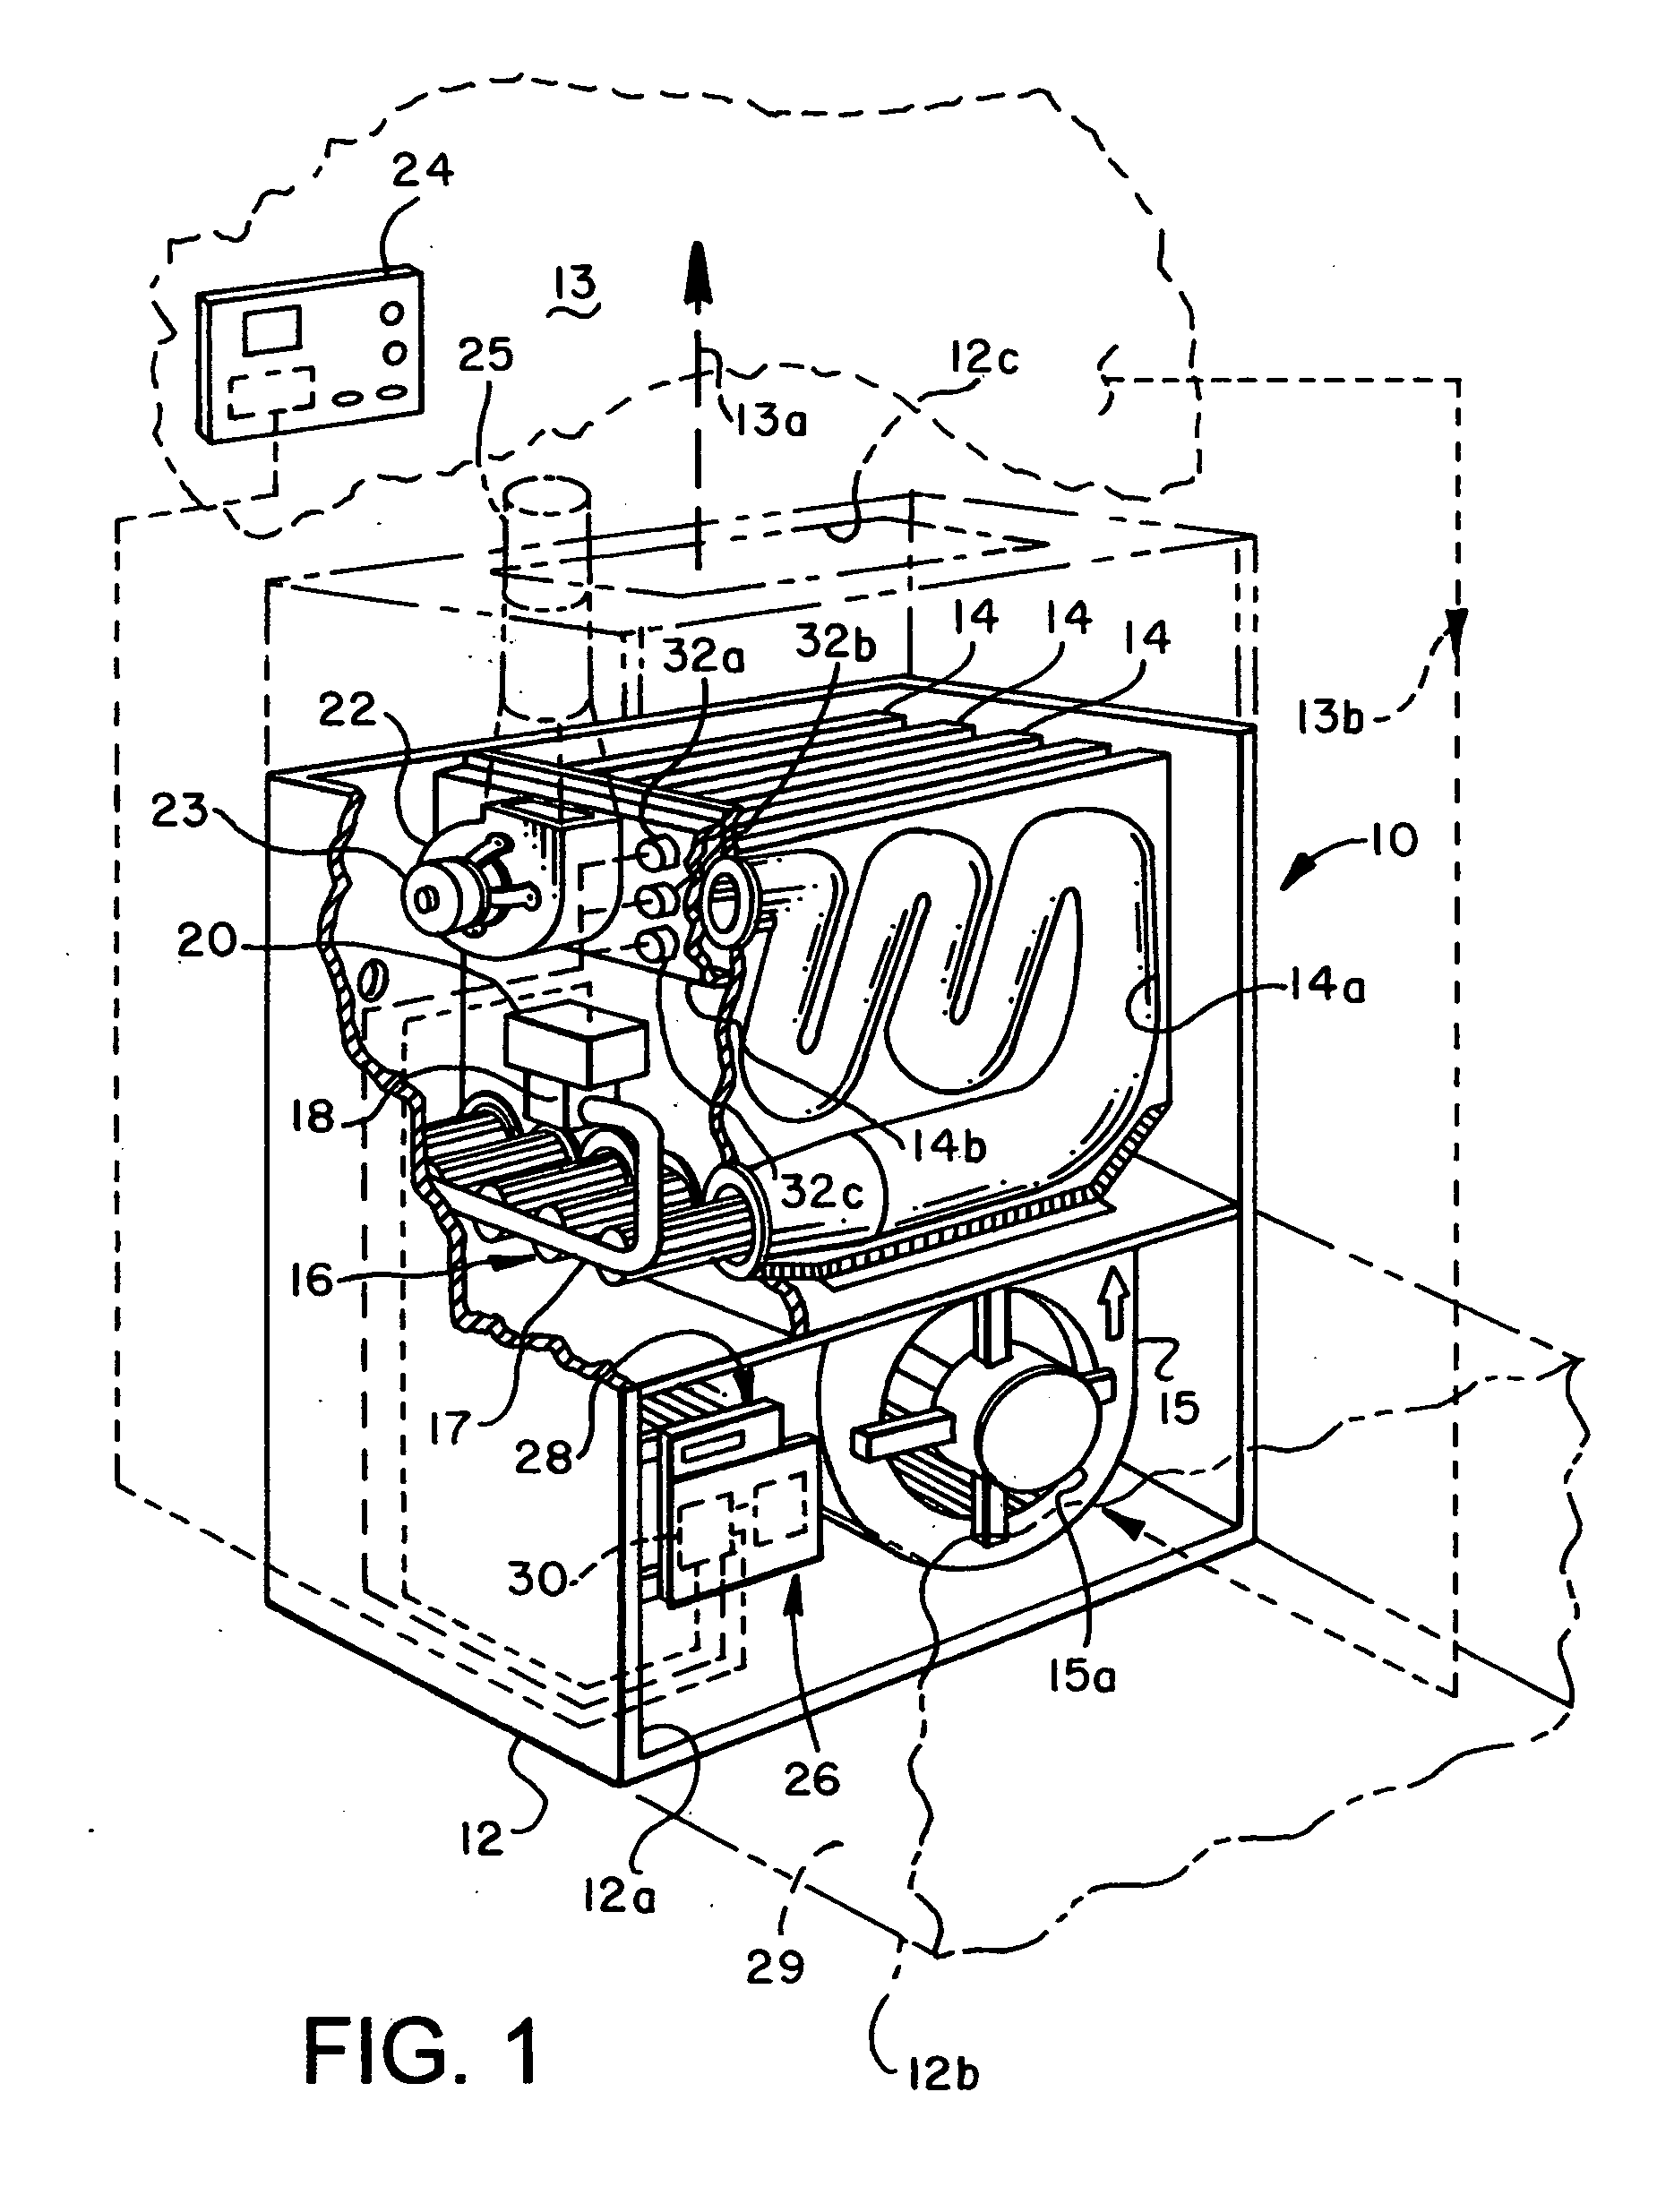 Inducer speed control method for combustion furnace